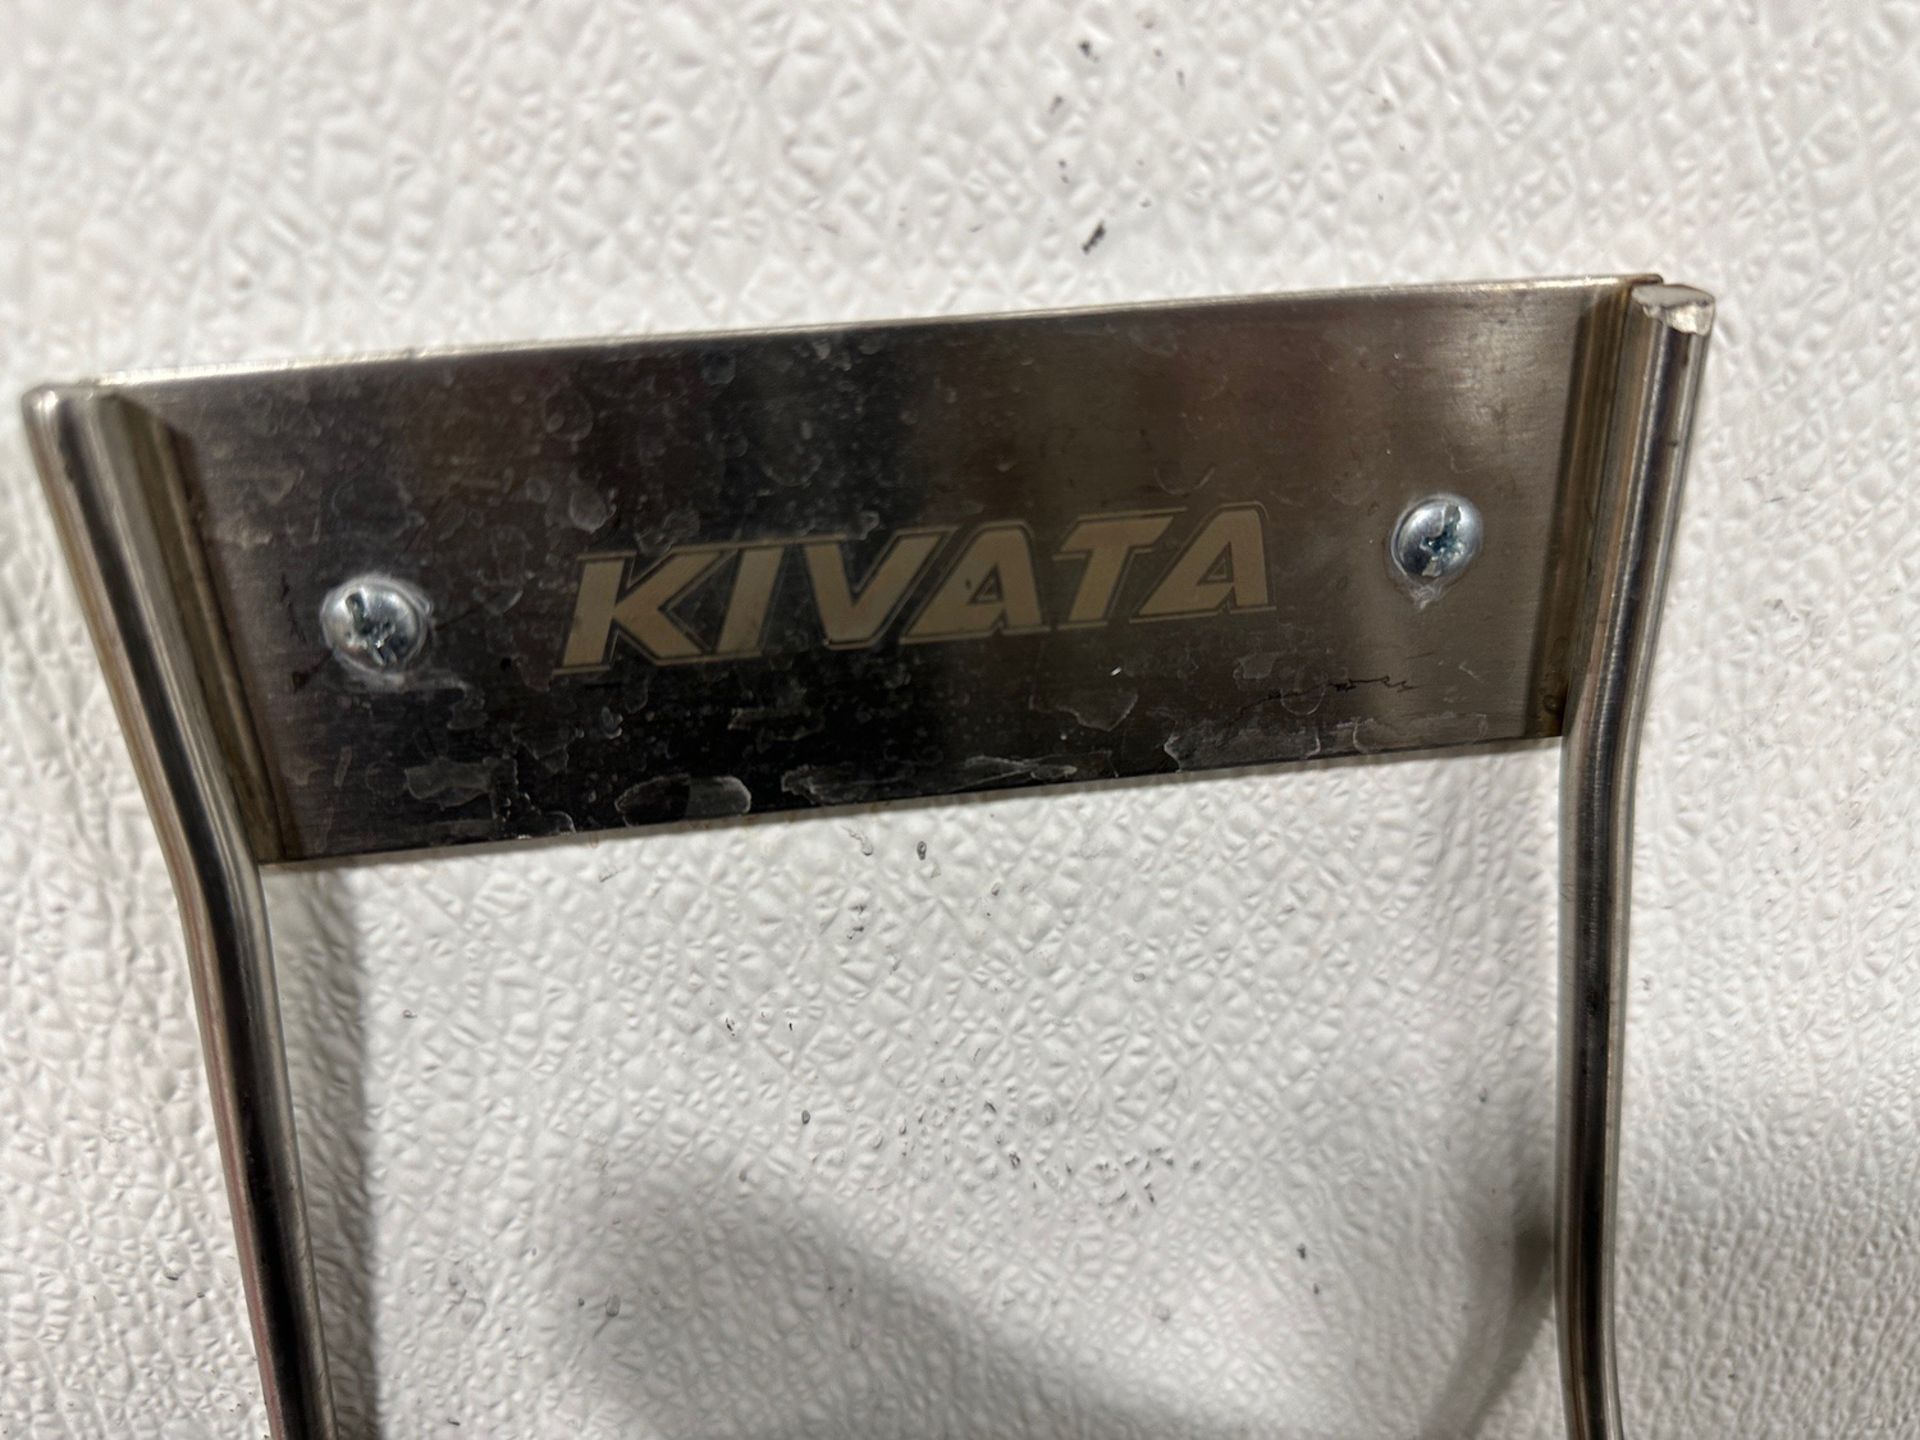 Heavy Duty Water Hose with Kivata Stainless Steel Hose Hanger - Image 2 of 2